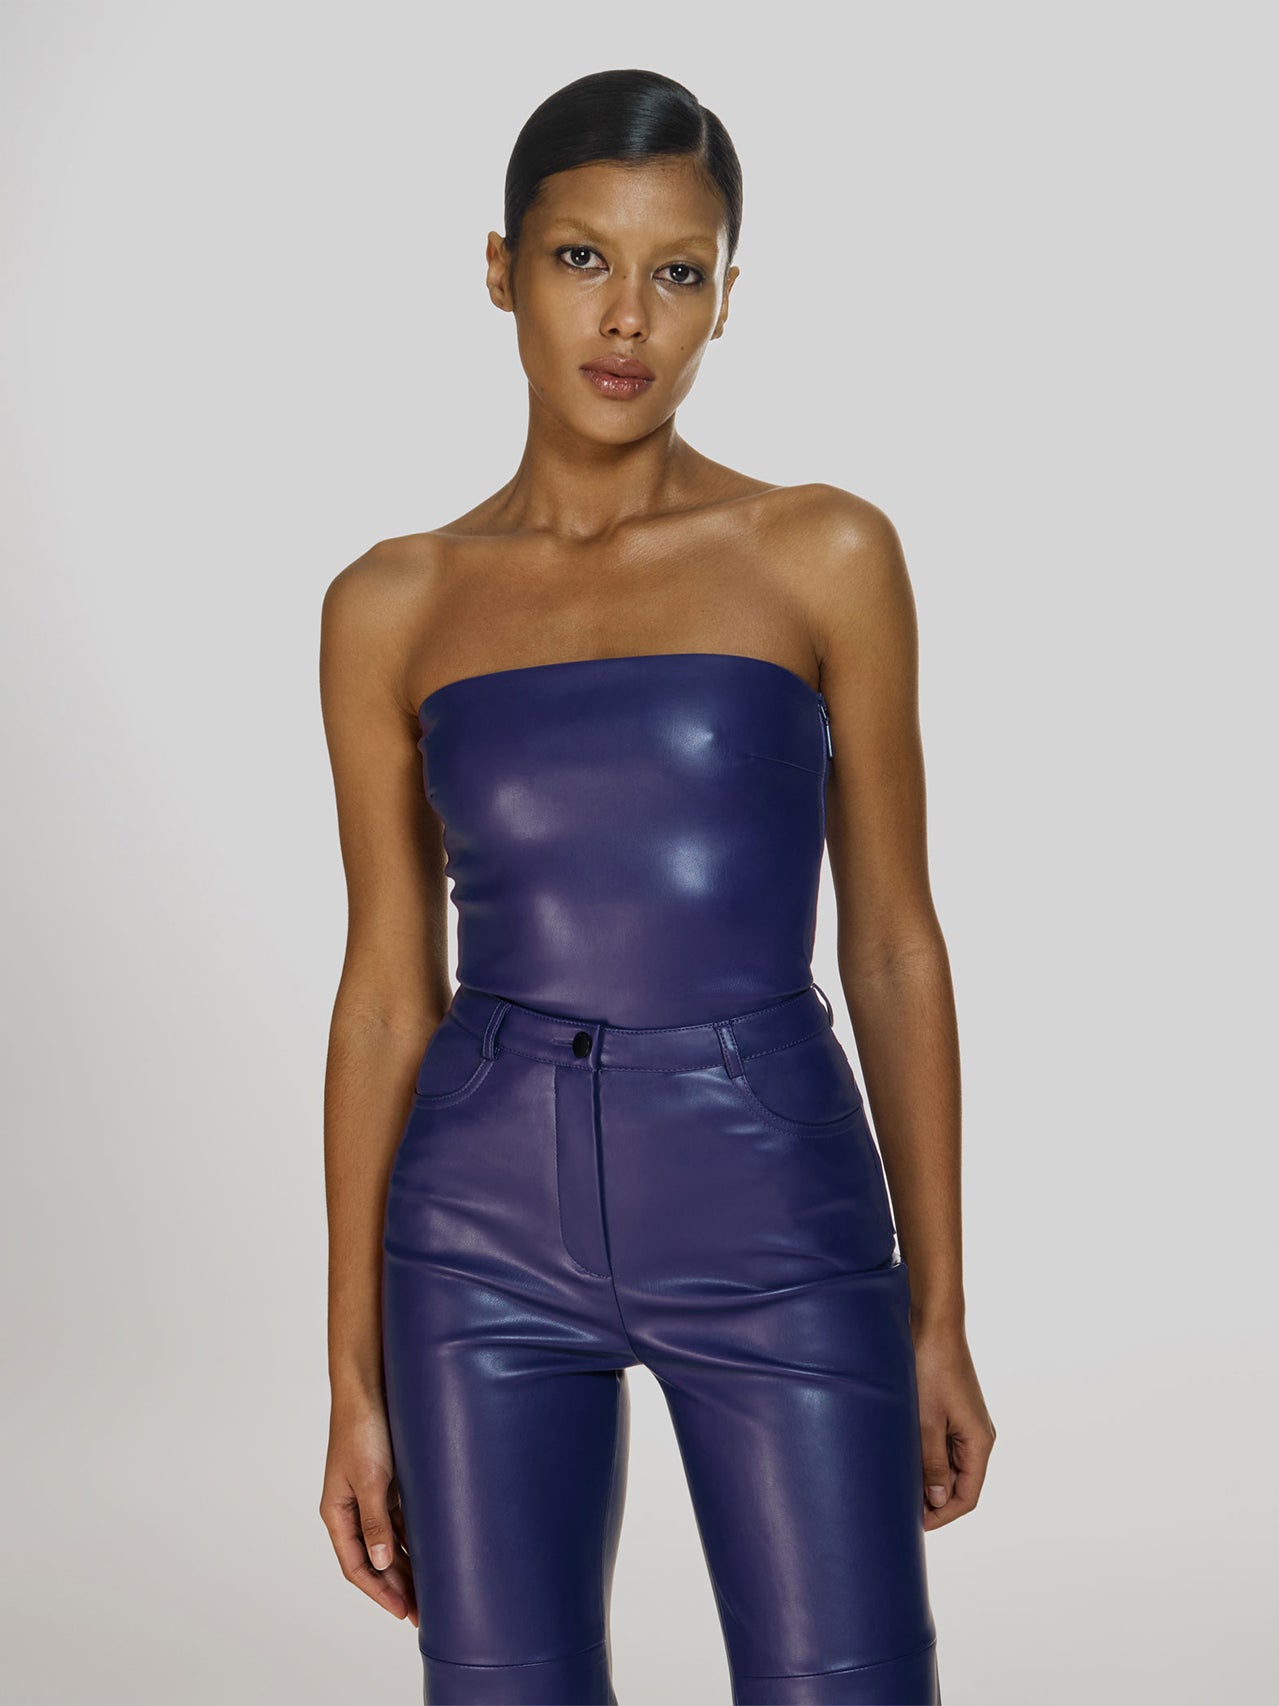 Cowboy shot of a girl in a purple vegan leather tube top and purple vegan leather pants with straight leg